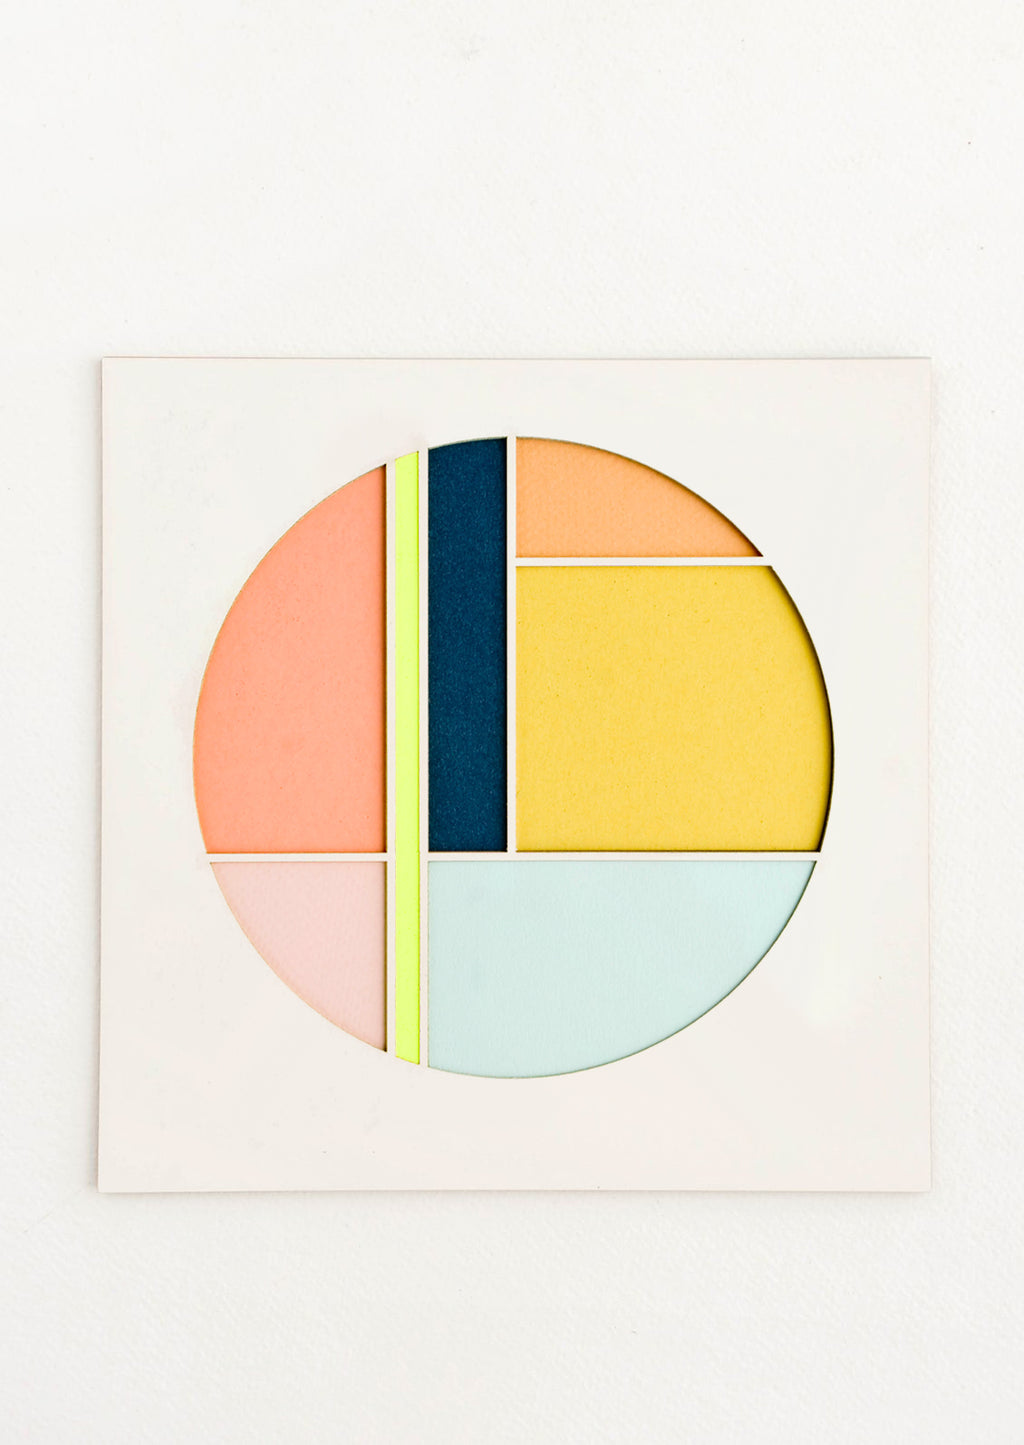 Neon Yellow Multi: Square artwork with off-white background and color blocked, laser-cut circle